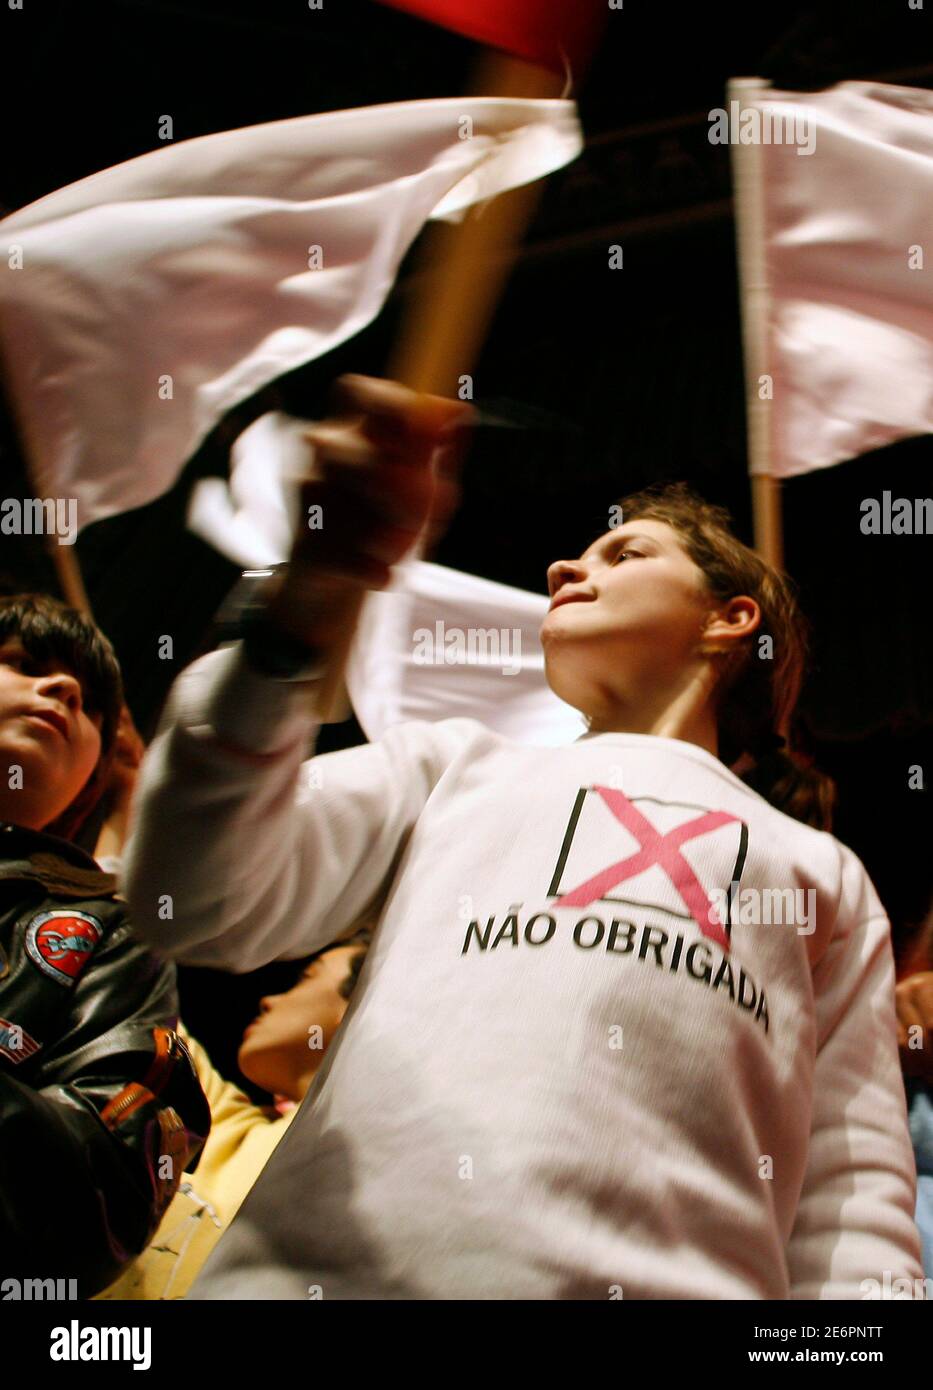 A girl wearing a t-shirt that reads 'No thanks' waves a flag during an anti-abortion rally in Lisbon February 8, 2007. The Portuguese vote on Sunday in a referendum on legalising abortion which pits liberals seeking a more open society against Roman Catholics determined to safeguard their traditional values. REUTERS/Jose Manuel Ribeiro (PORTUGAL) Stock Photo